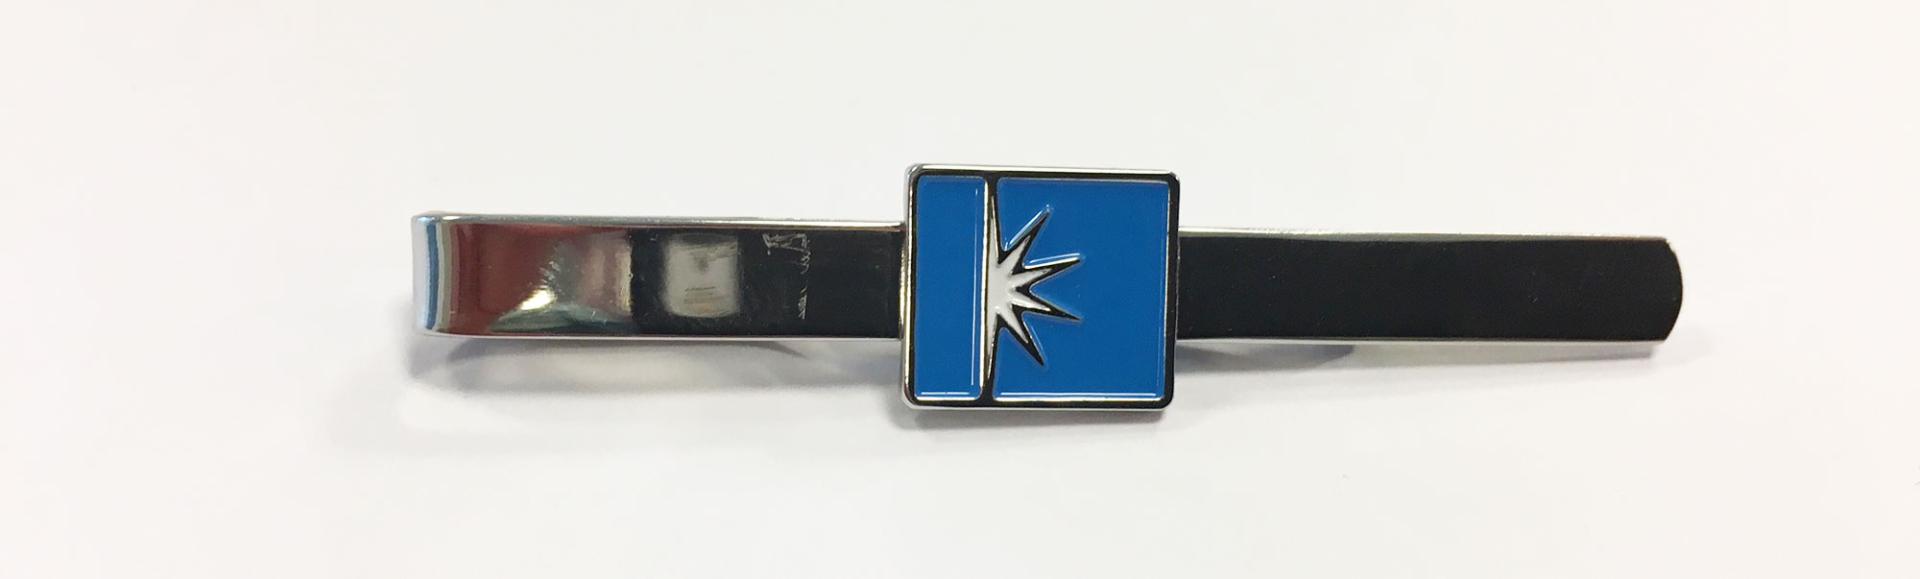 Star Air tie clip with logo